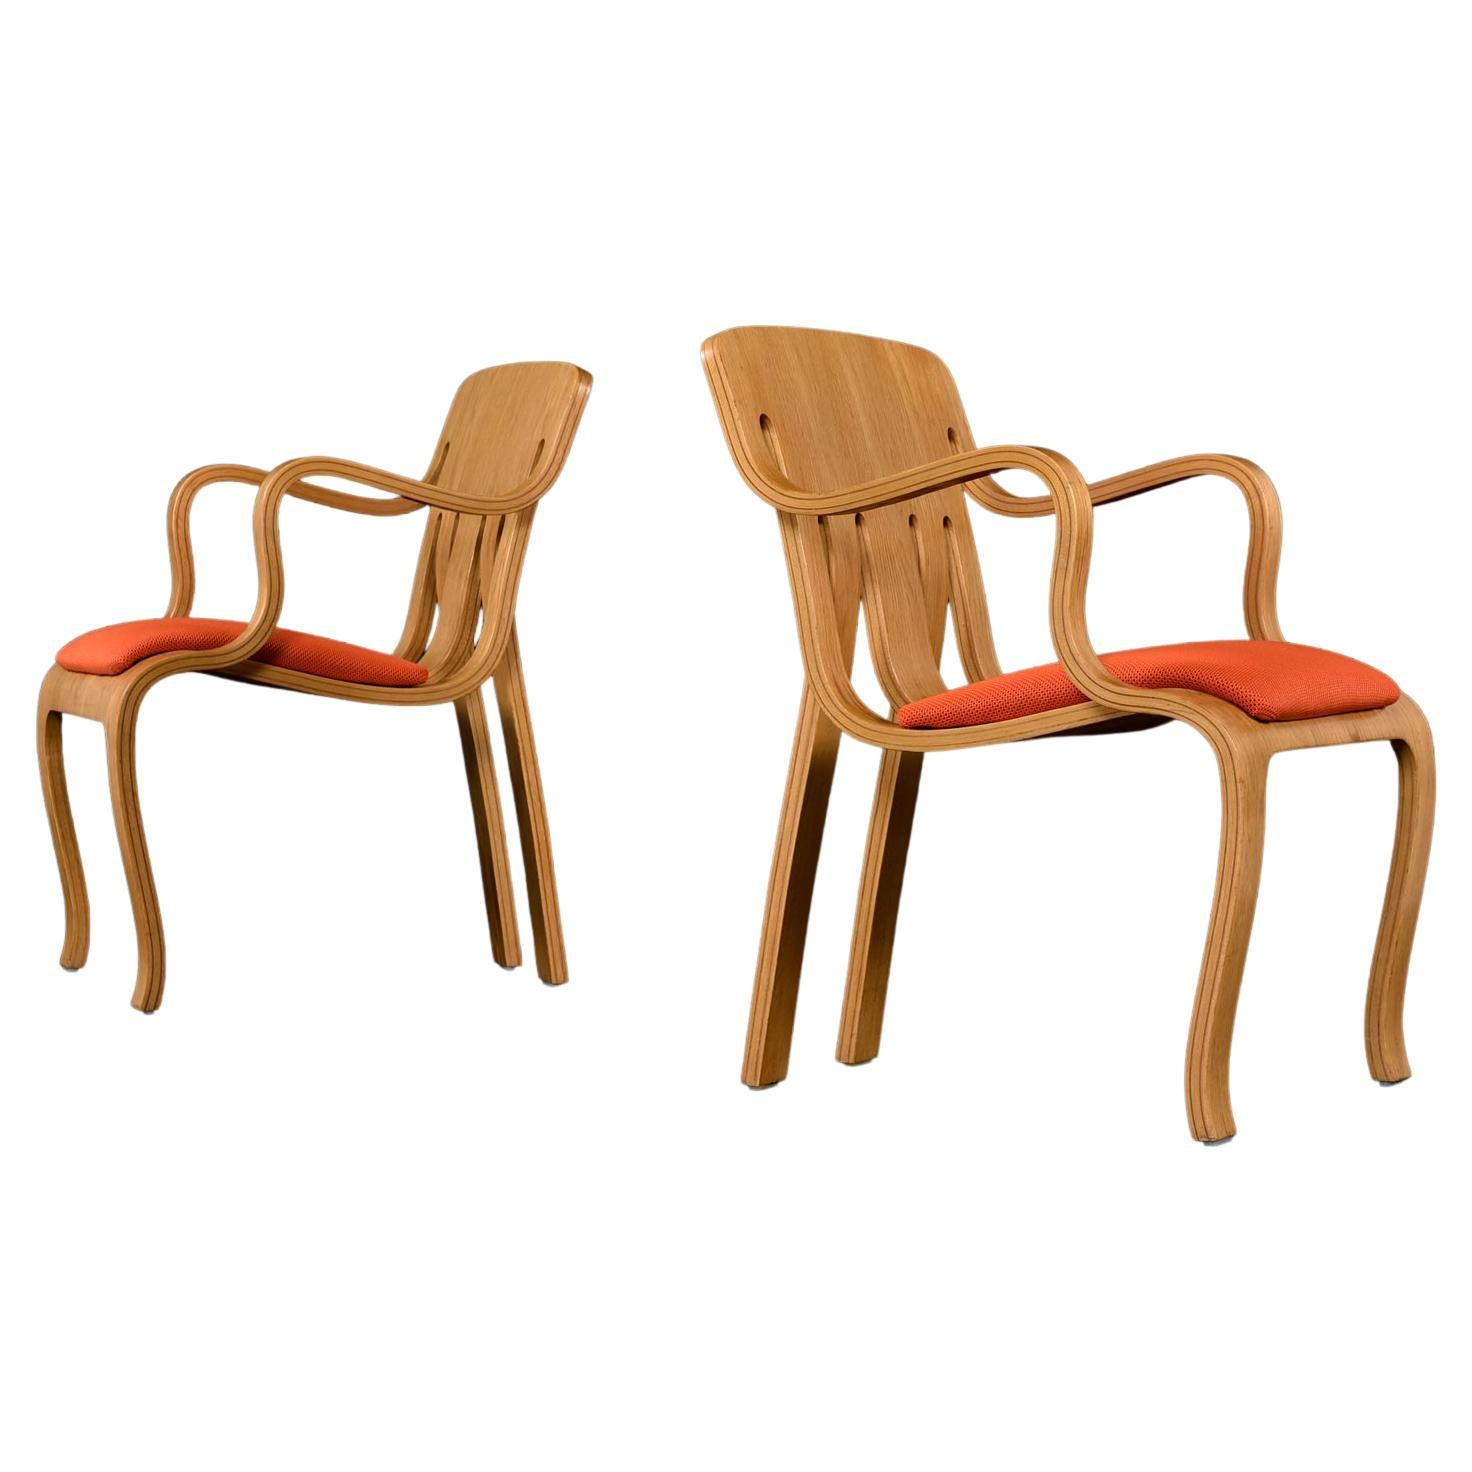 1978 Molded Plywood Armchair Set of 2 in Oak by Peter Danko for Thonet For Sale